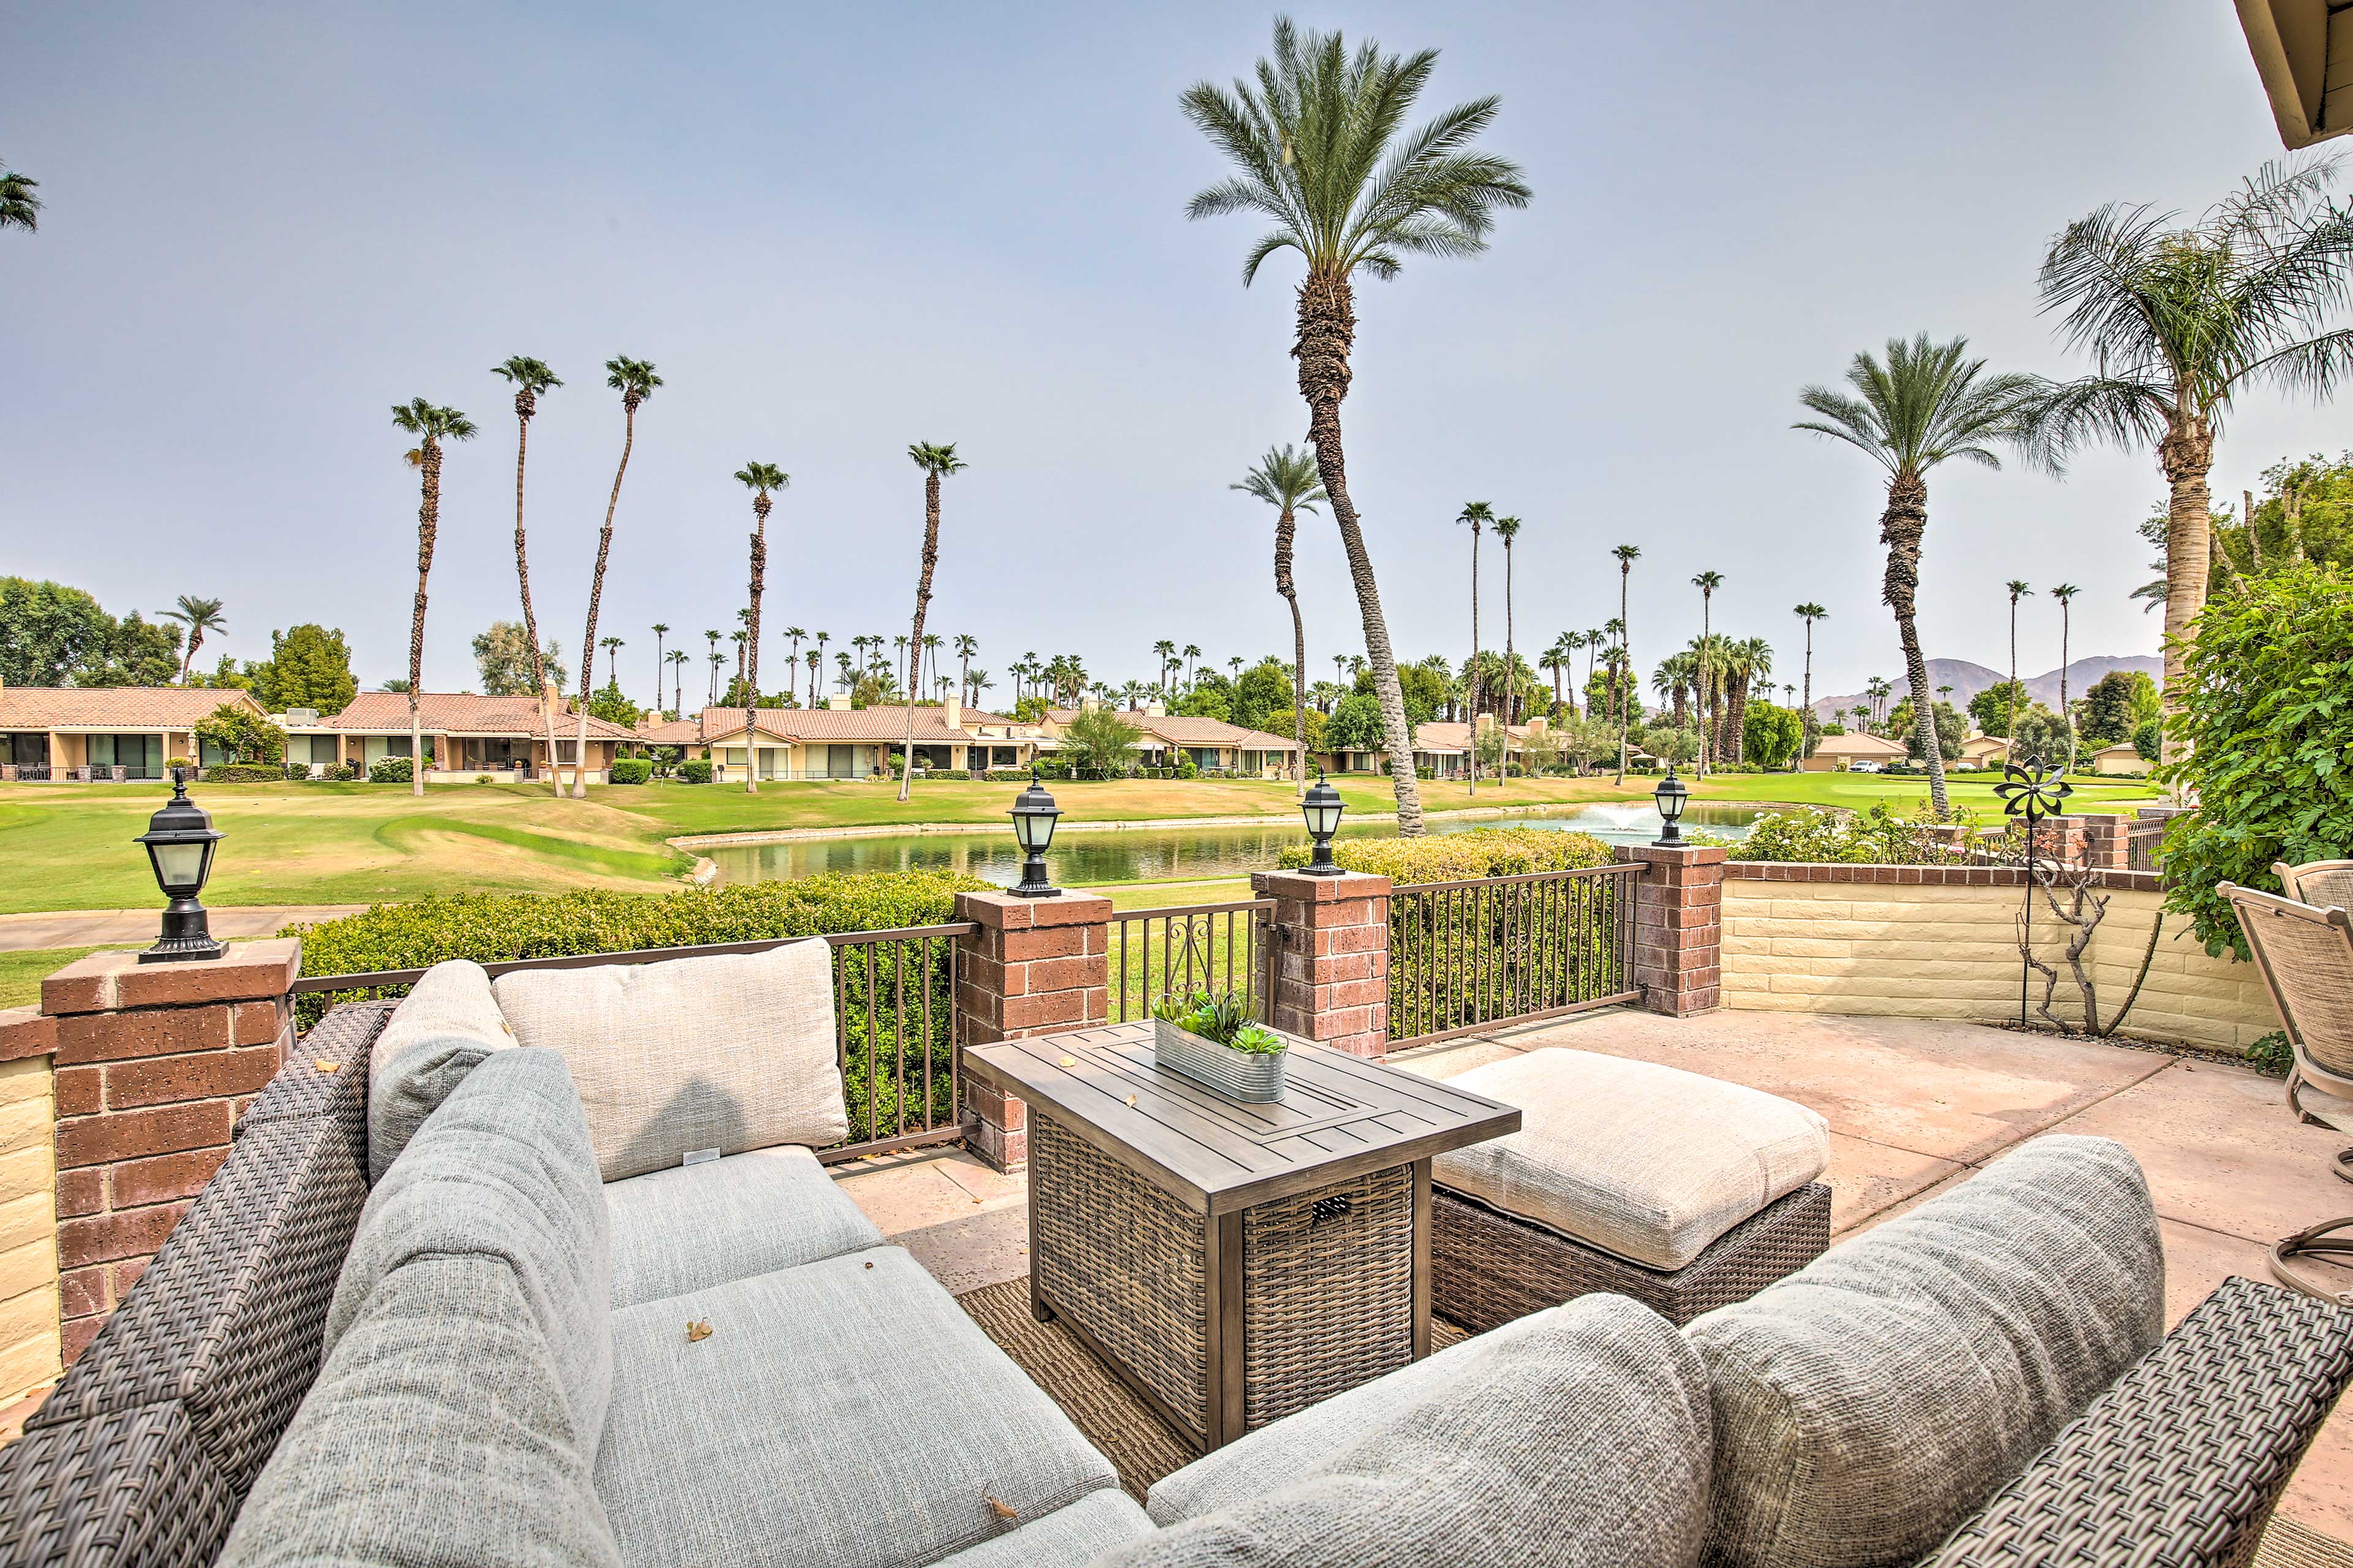 Soak in the views as you relax on the furnished patio.